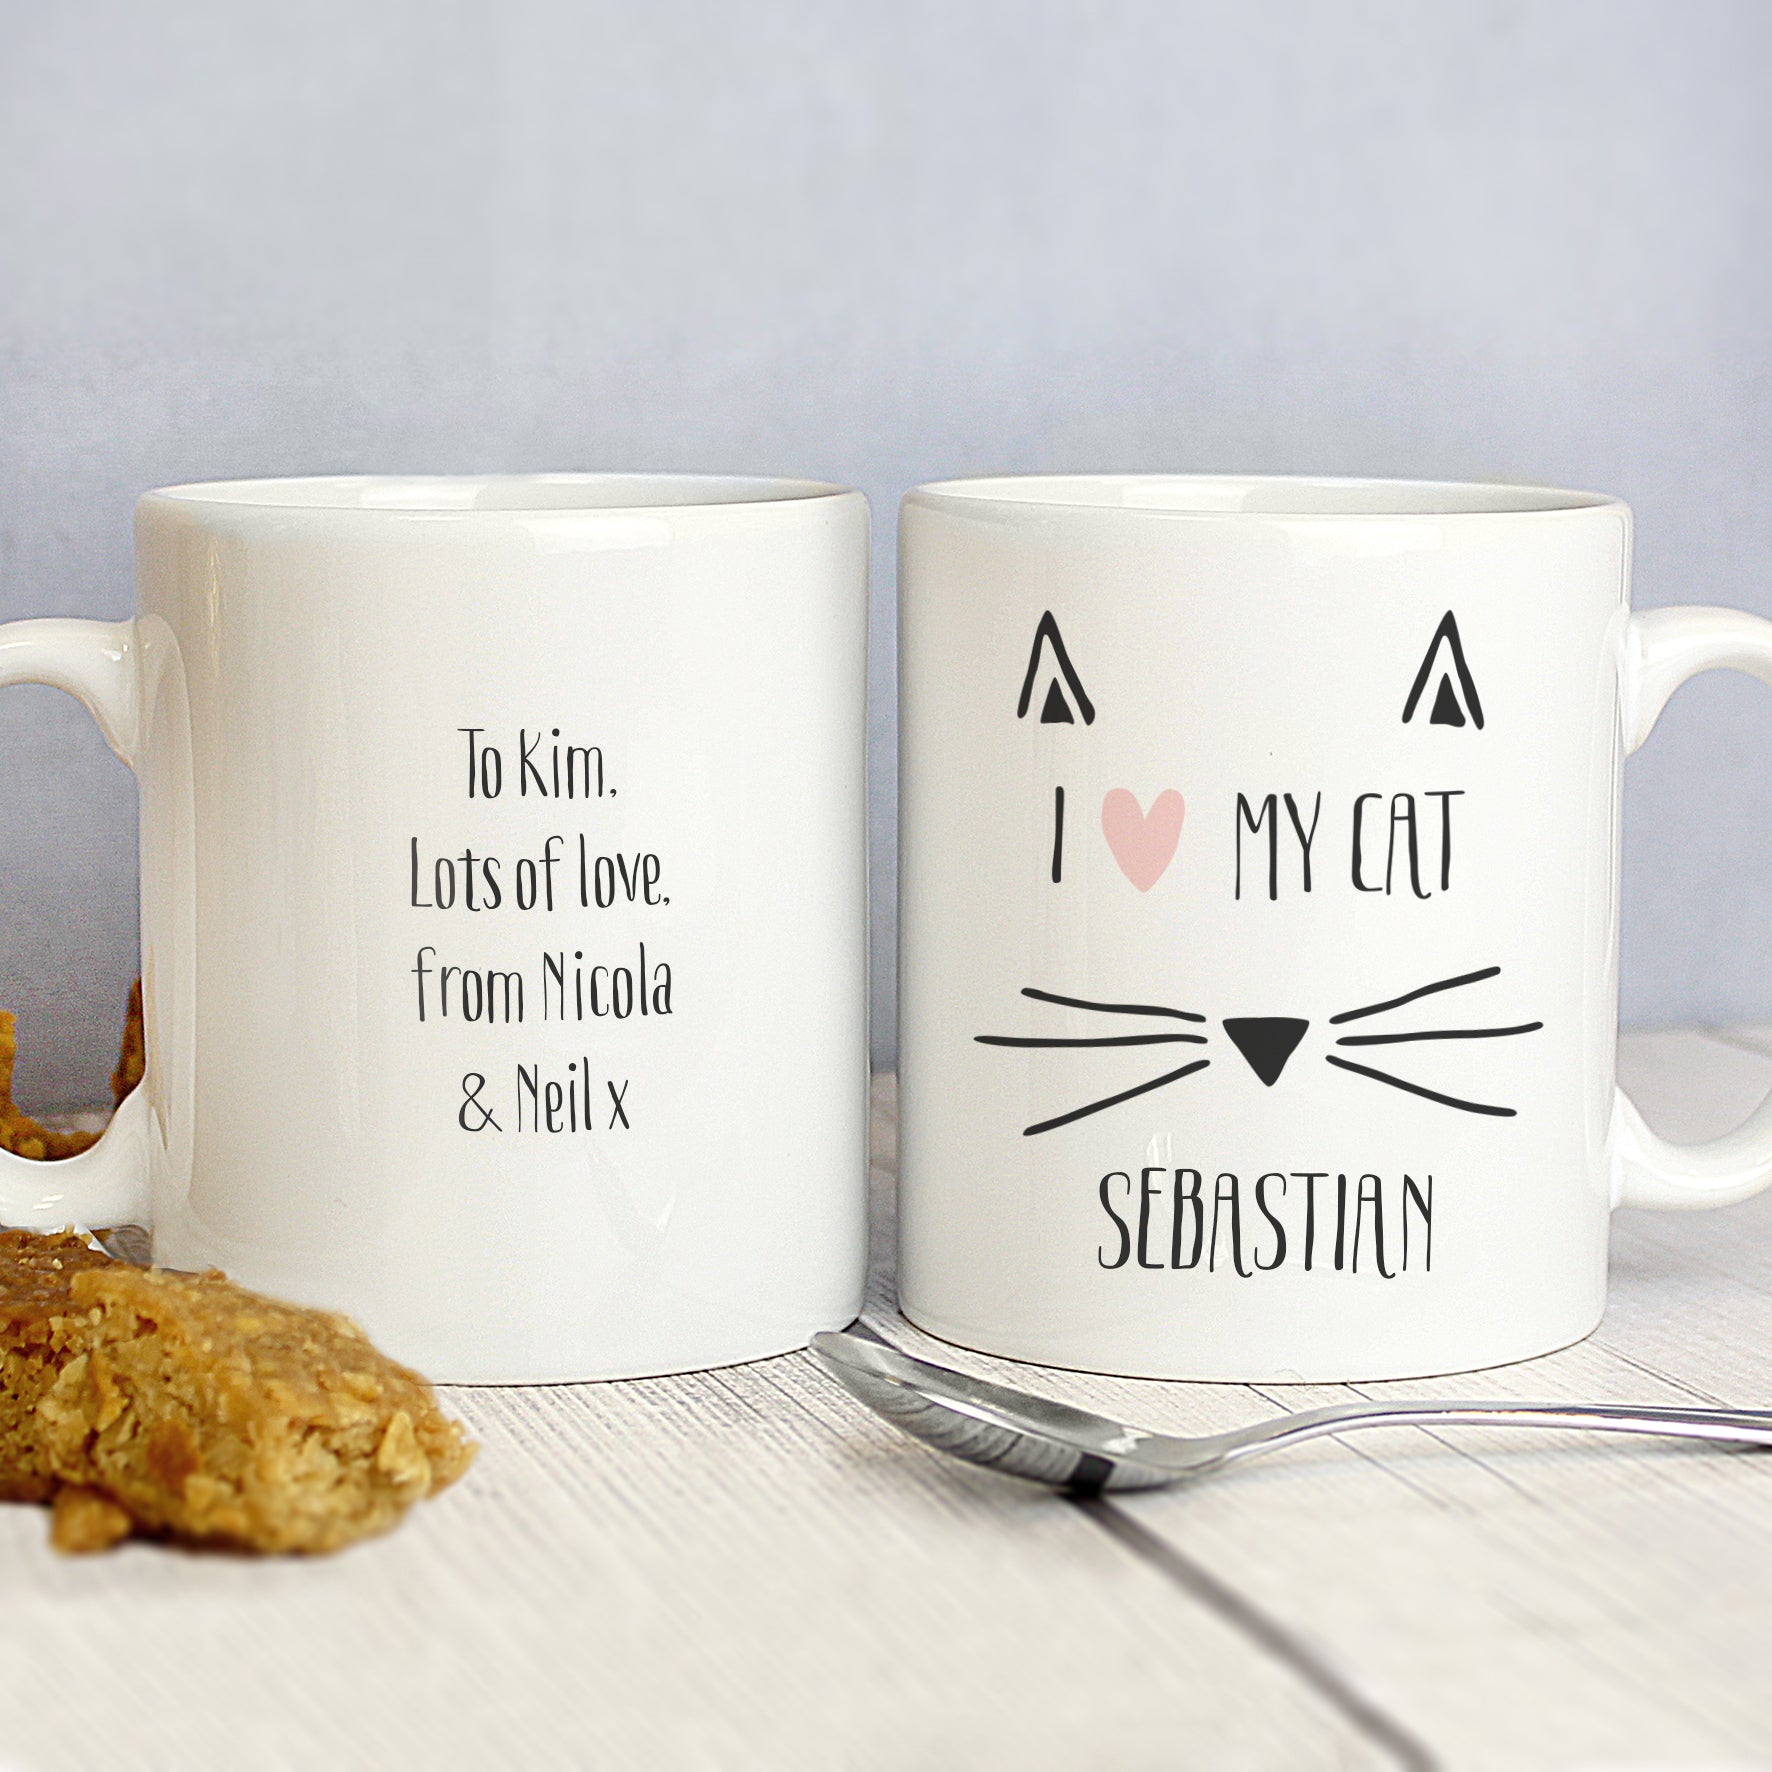 Front and rear image of a white ceramic mug with a fun cat illustration which can be personalised with a name and message of your choice